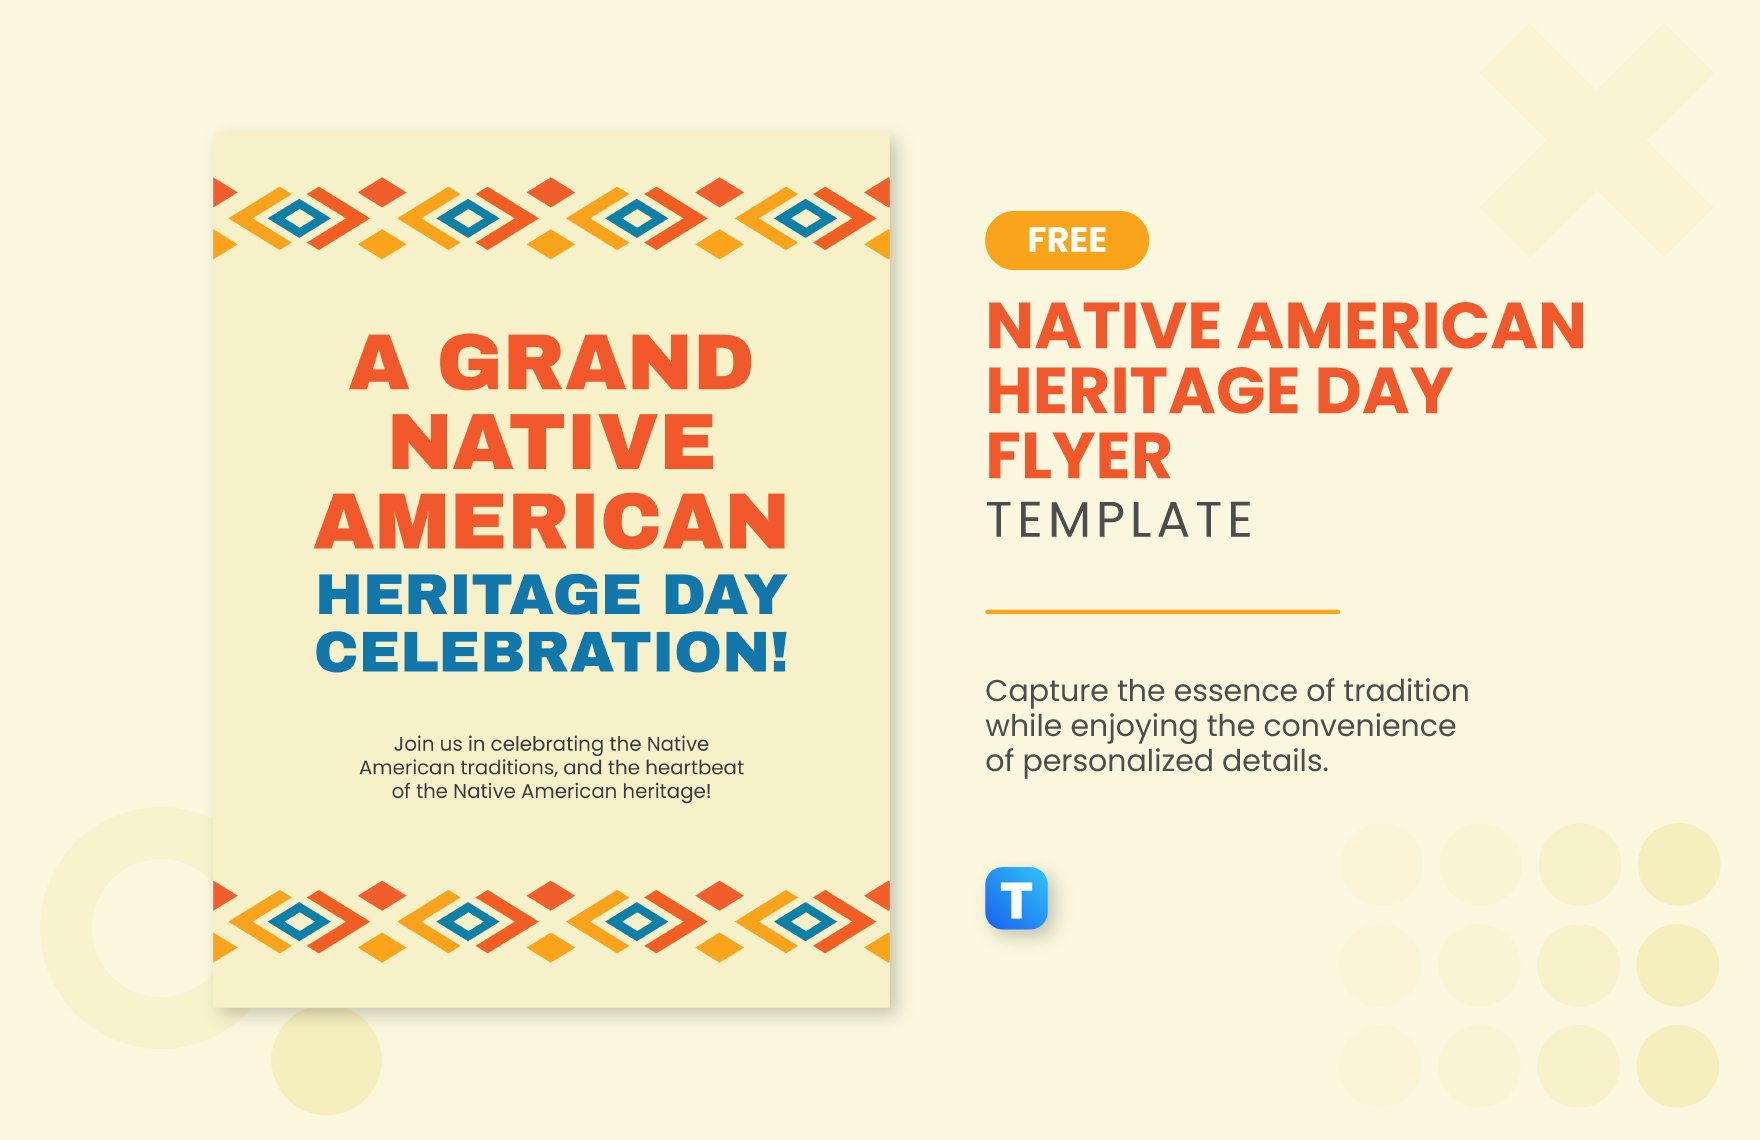 Native American Heritage Day Flyer